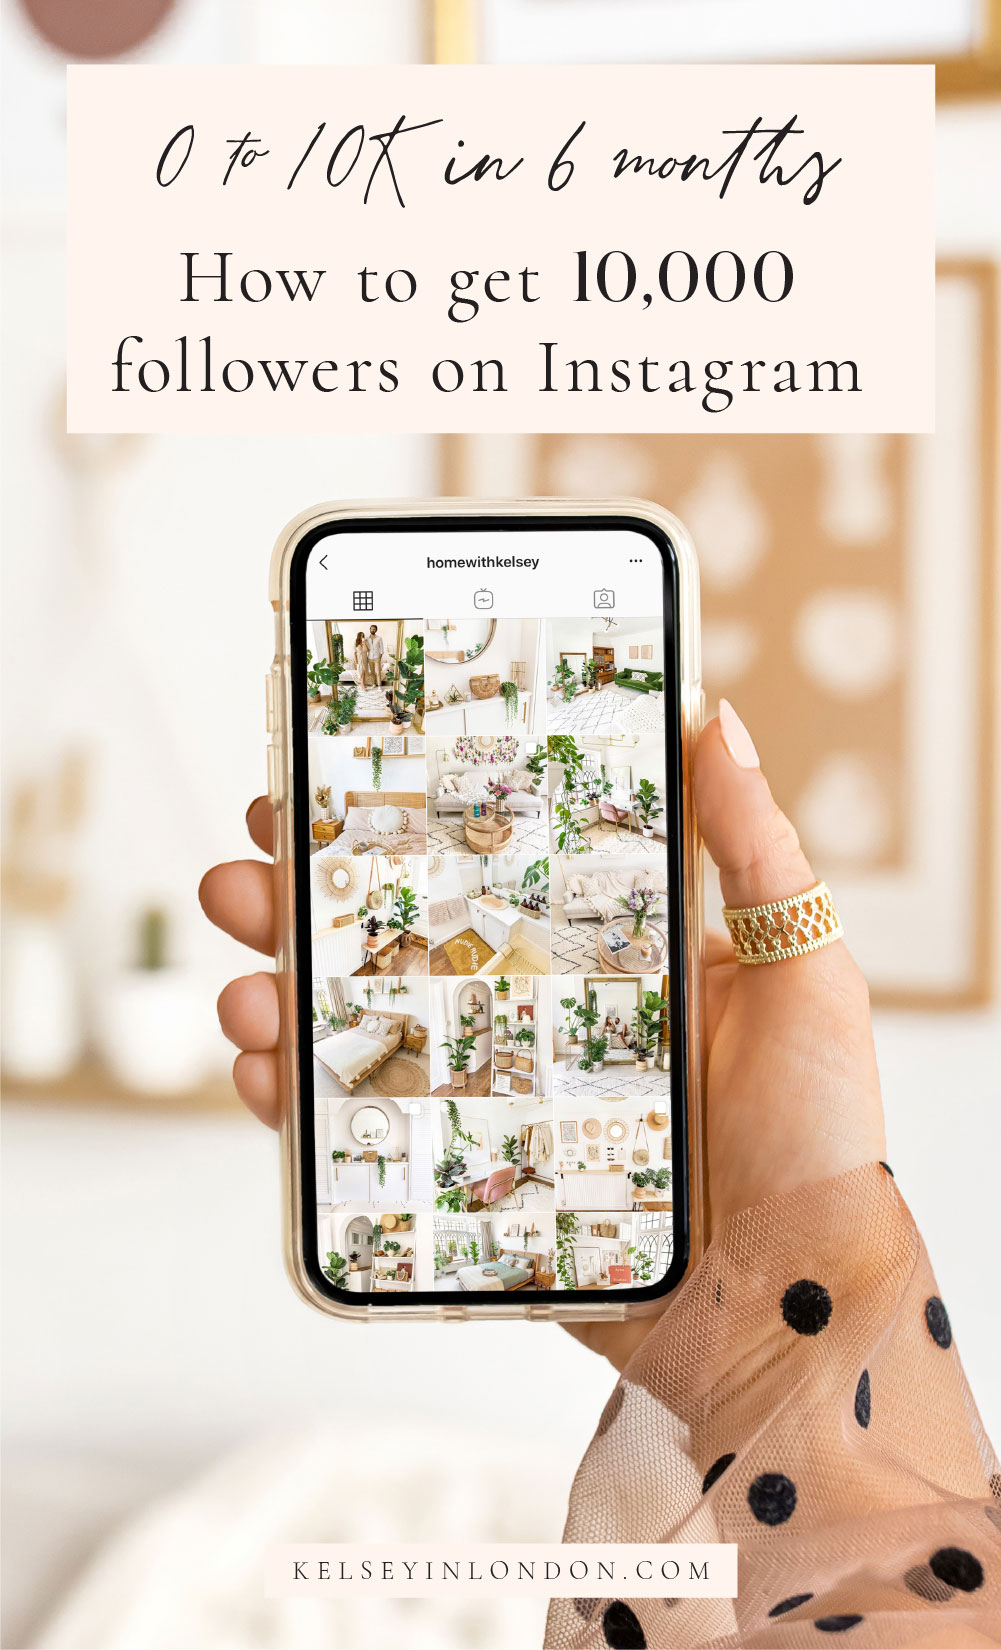 Kelseyinlondon homewithkelsey Kelsey Heinrichs Instagram hashtags strategy how to get 10000 followers on instagram growth social media tips 